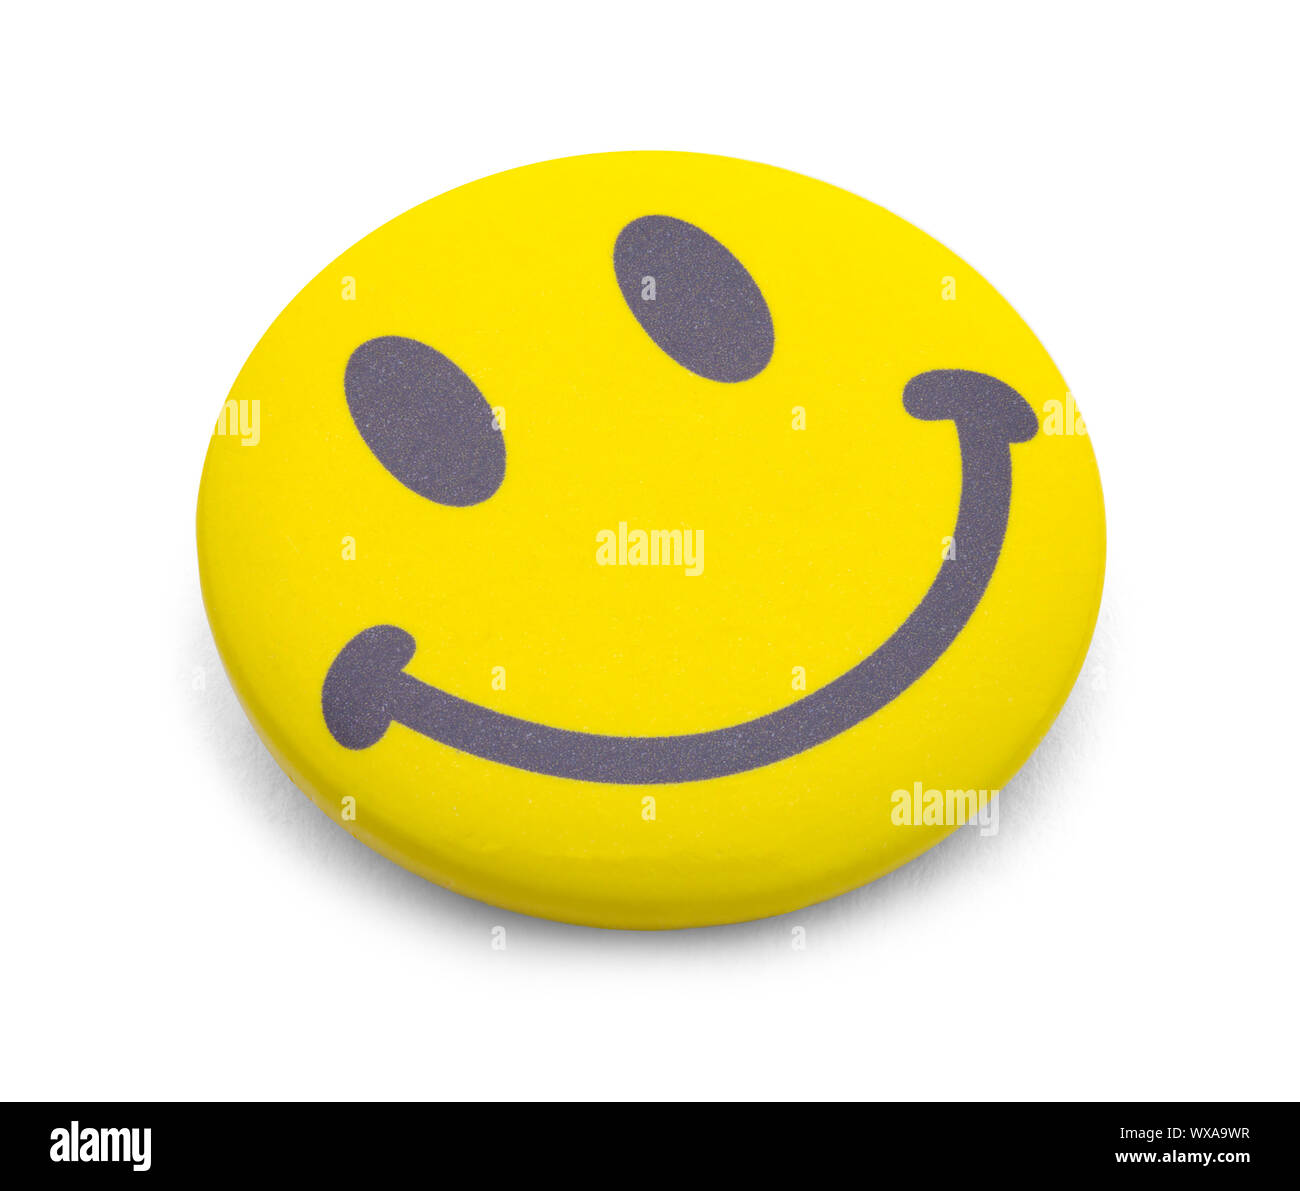 Yellow Happy Face Emoji Button Isolated on White. Stock Photo